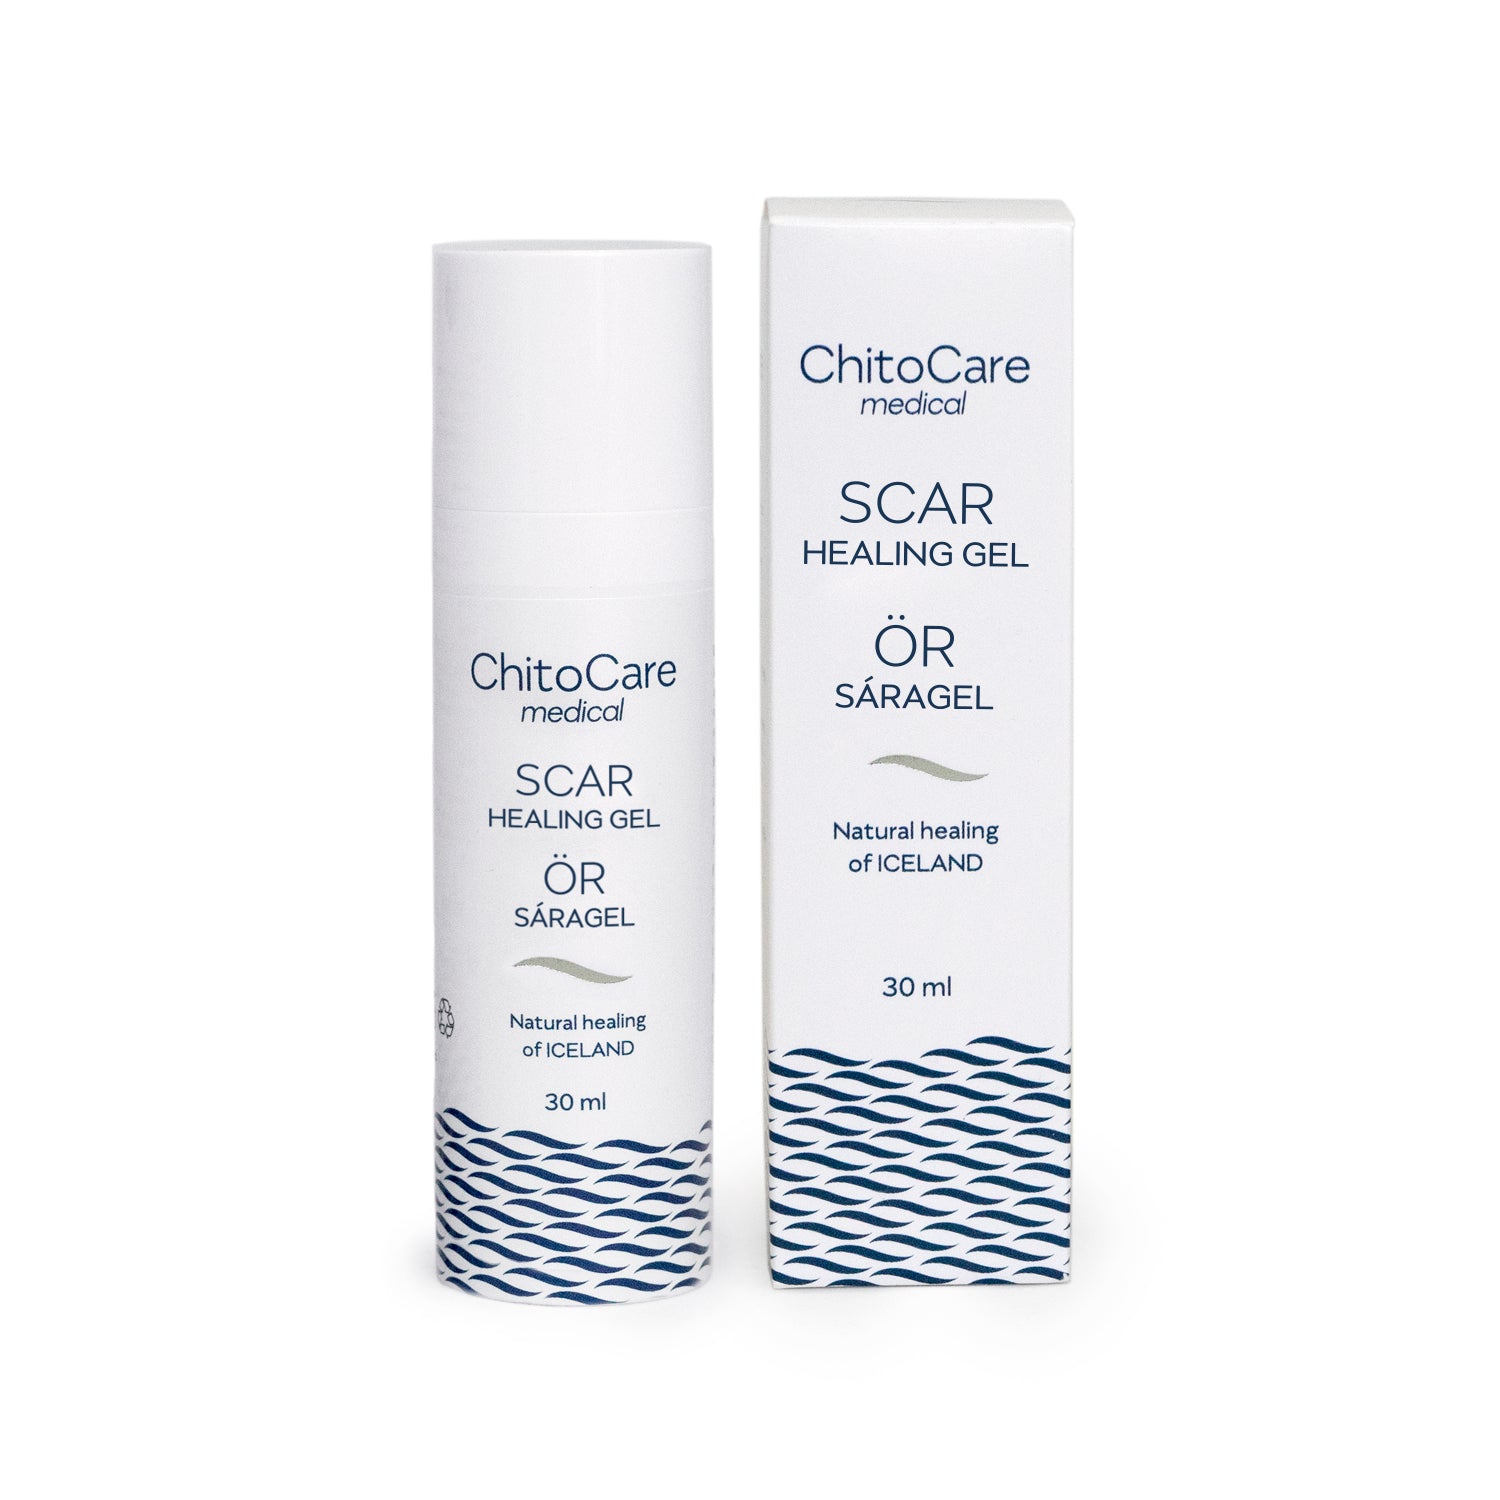 ChitoCare medical scar healing gel –